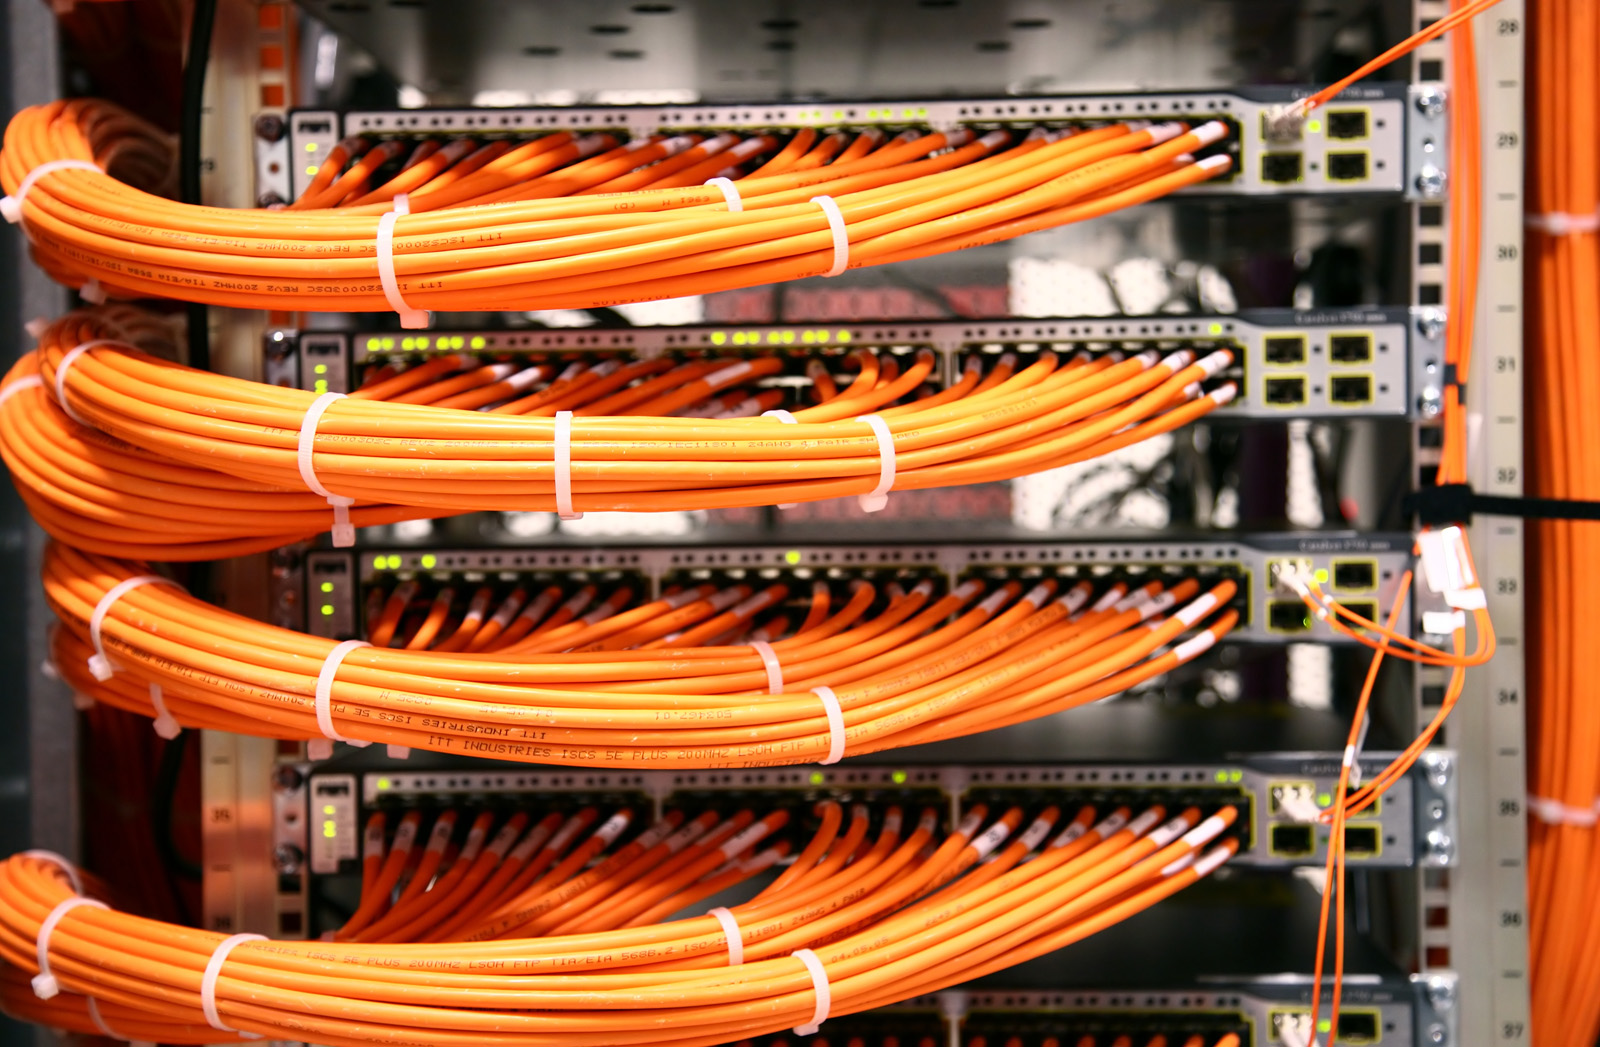 Greenup Kentucky Premier Voice & Data Network Cabling Solutions